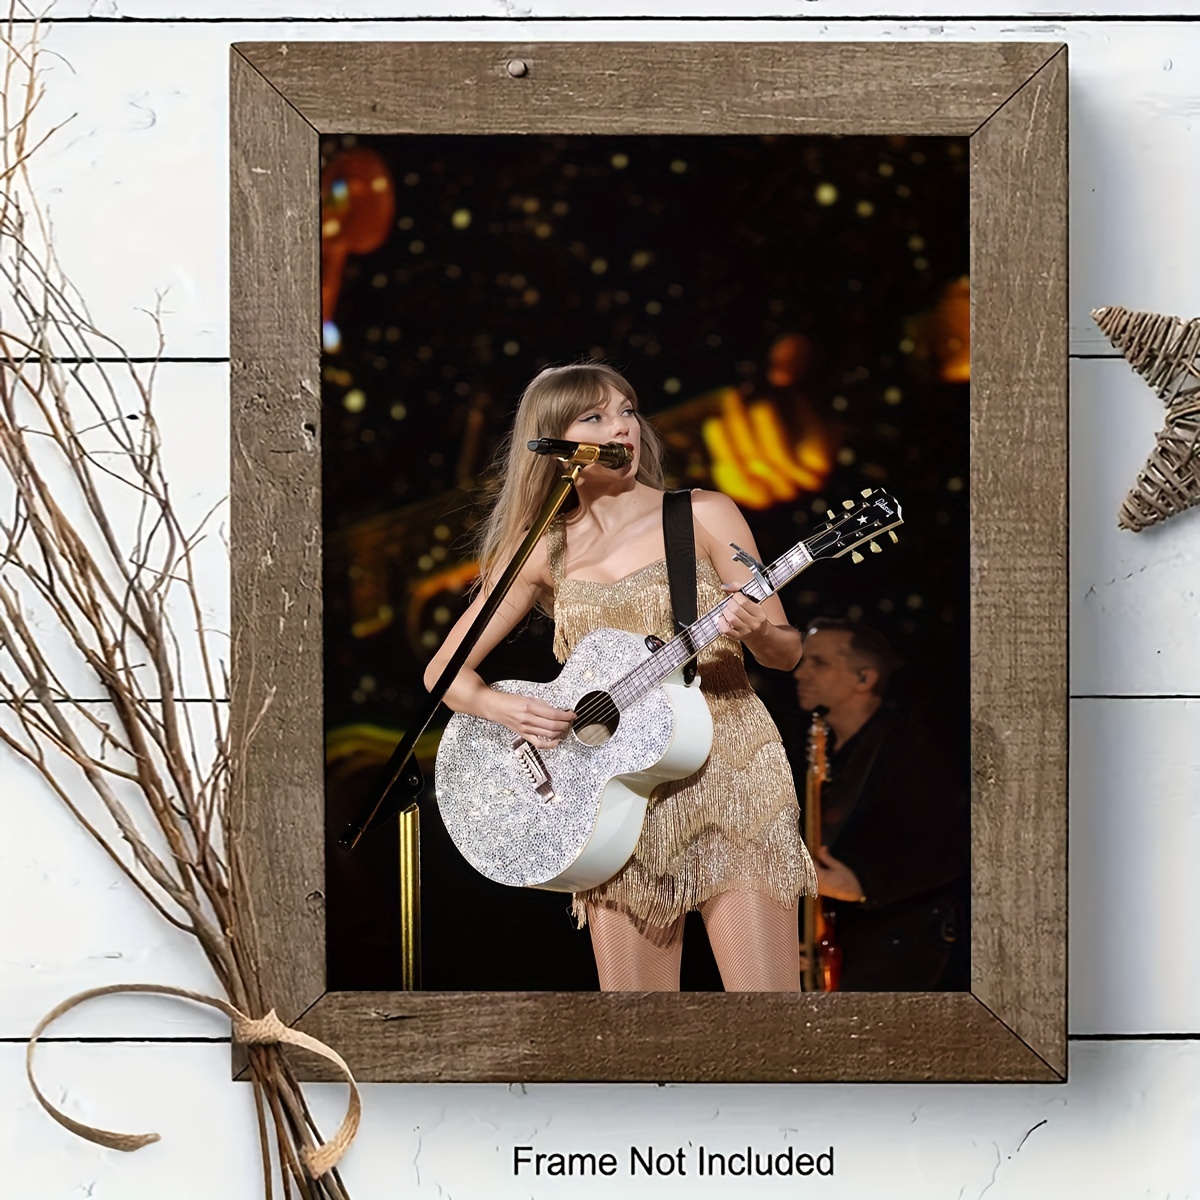 Taylor Music Swift Album Poster The Cover Signed Limited Poster Canvas Wall  Art Room Aesthetics for Girl and Boy Teens Dorm Decor - Unframed,Taylor  Swift Room Decor 